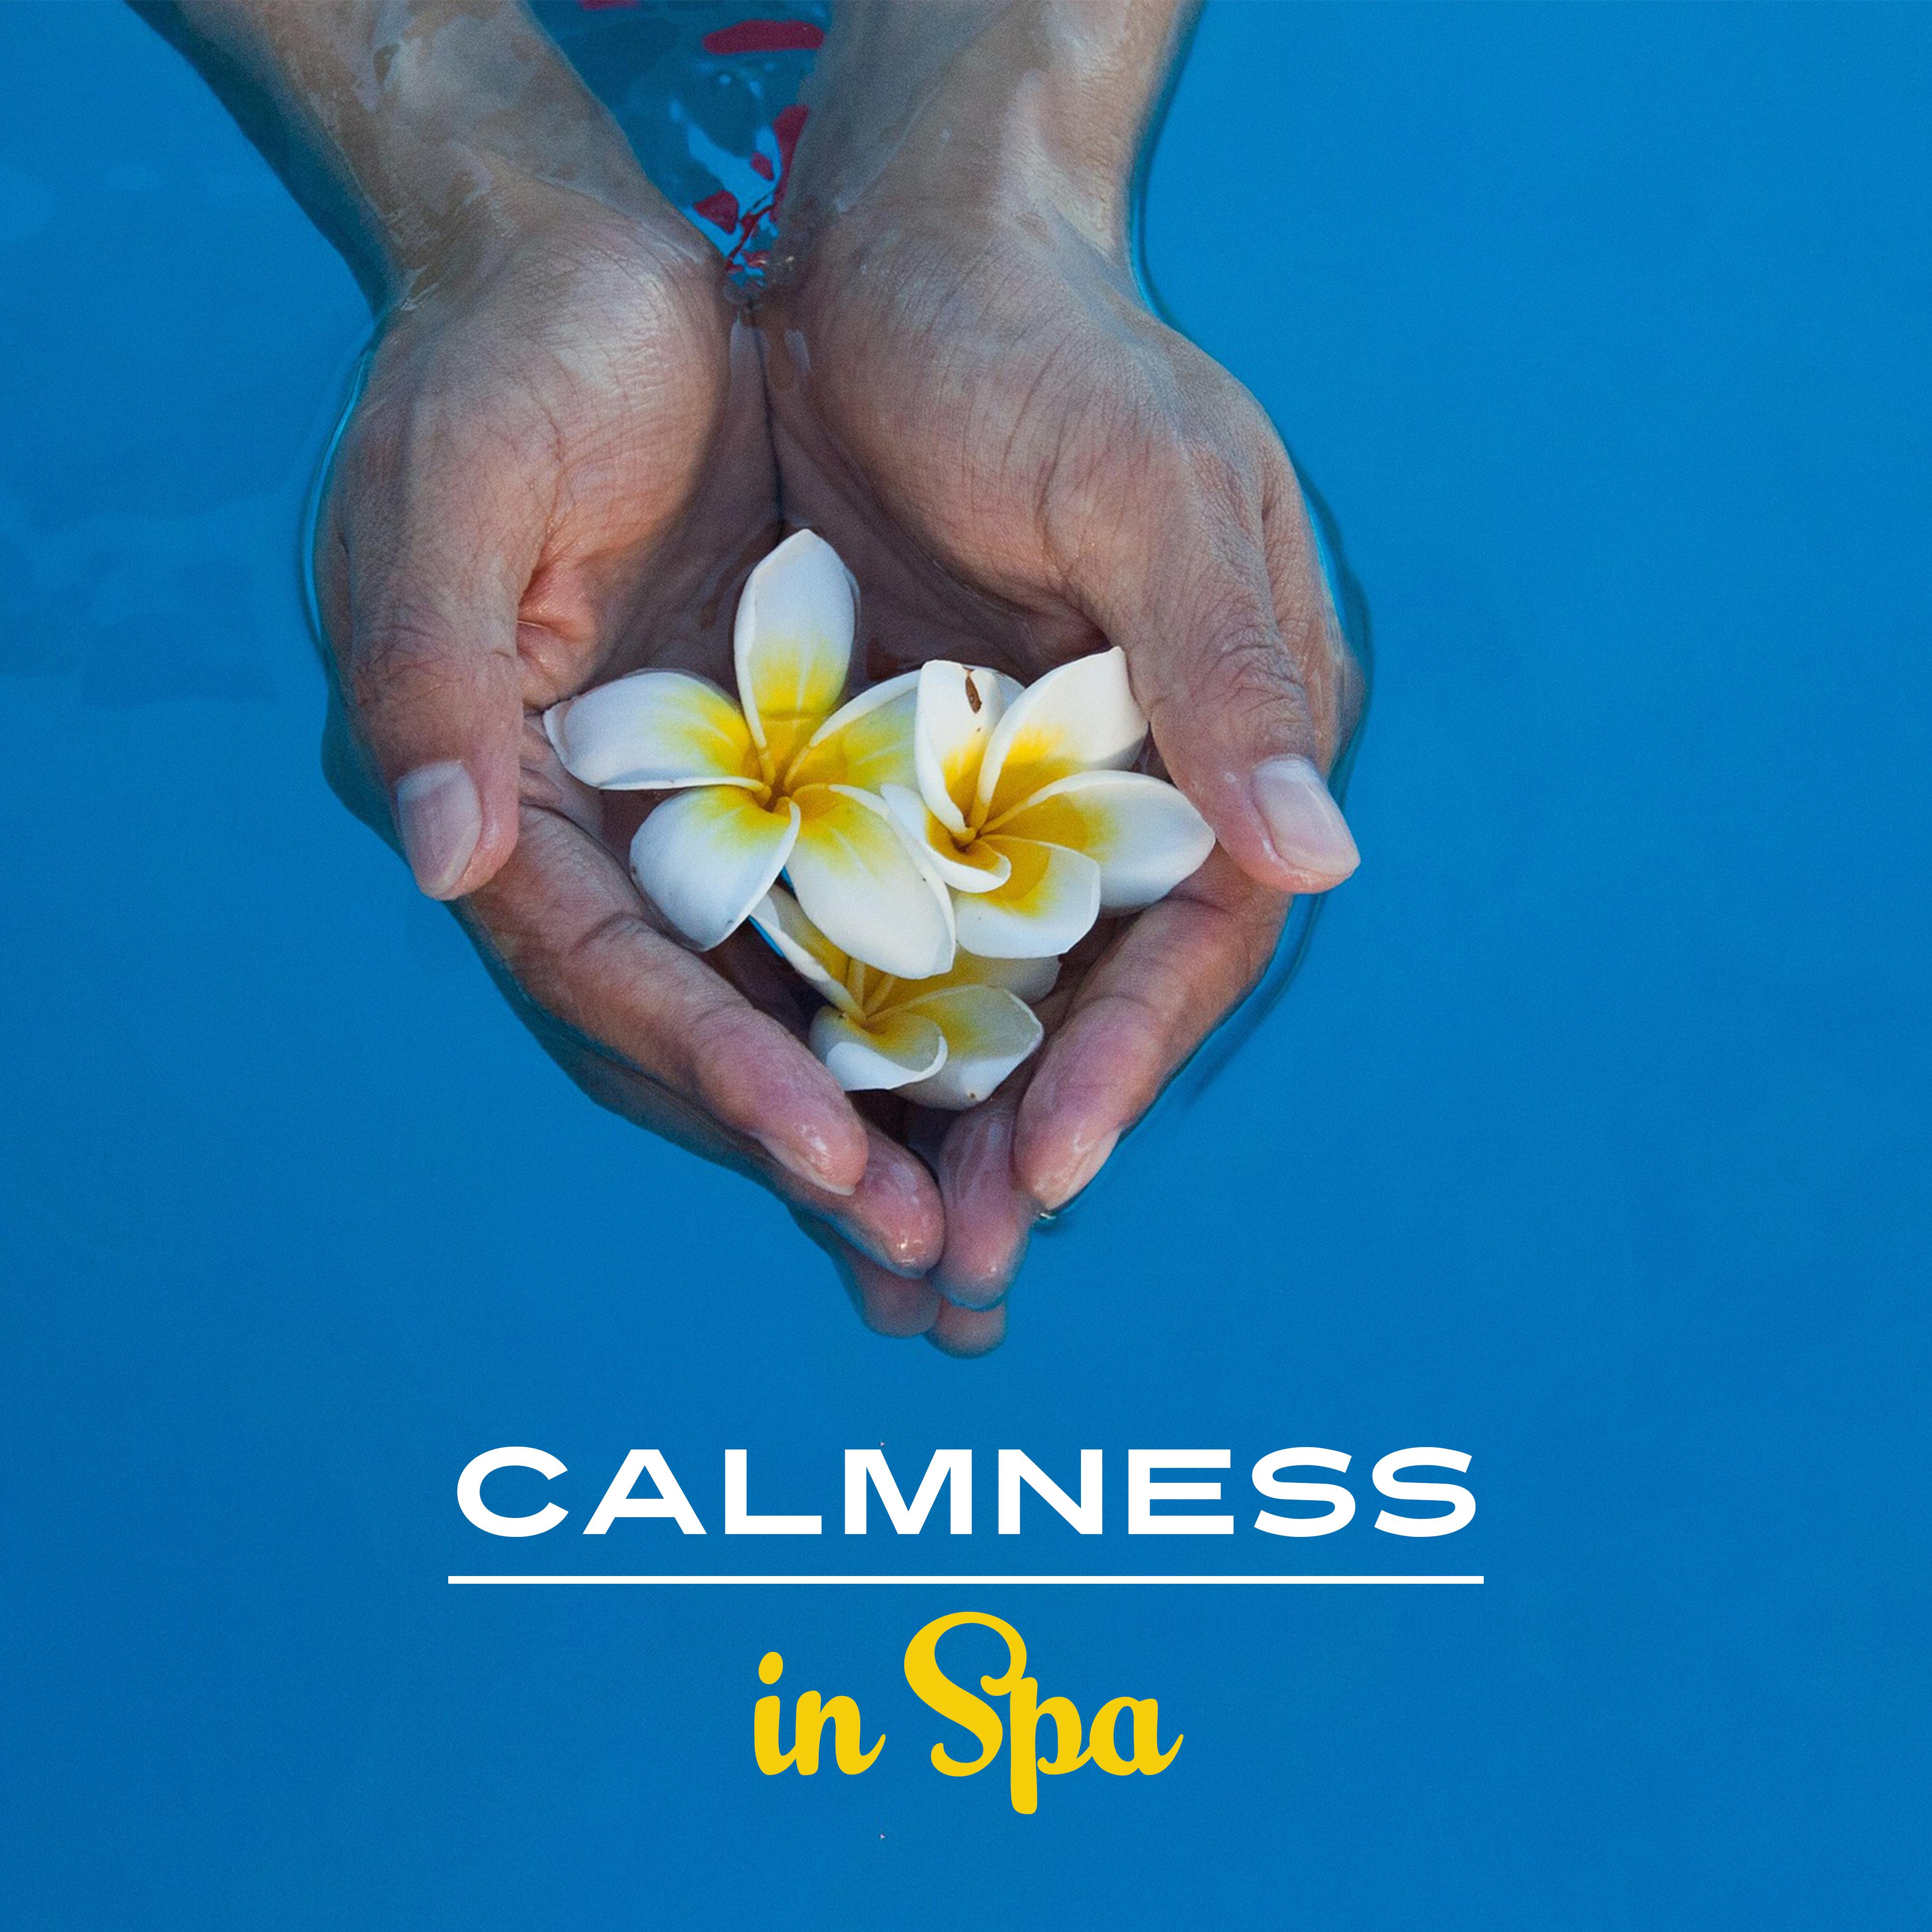 Calmness in Spa – Peaceful Music for Massage, Wellness, Relaxing Waves, Soothing Water for Relief, Spa Dreams, Zen